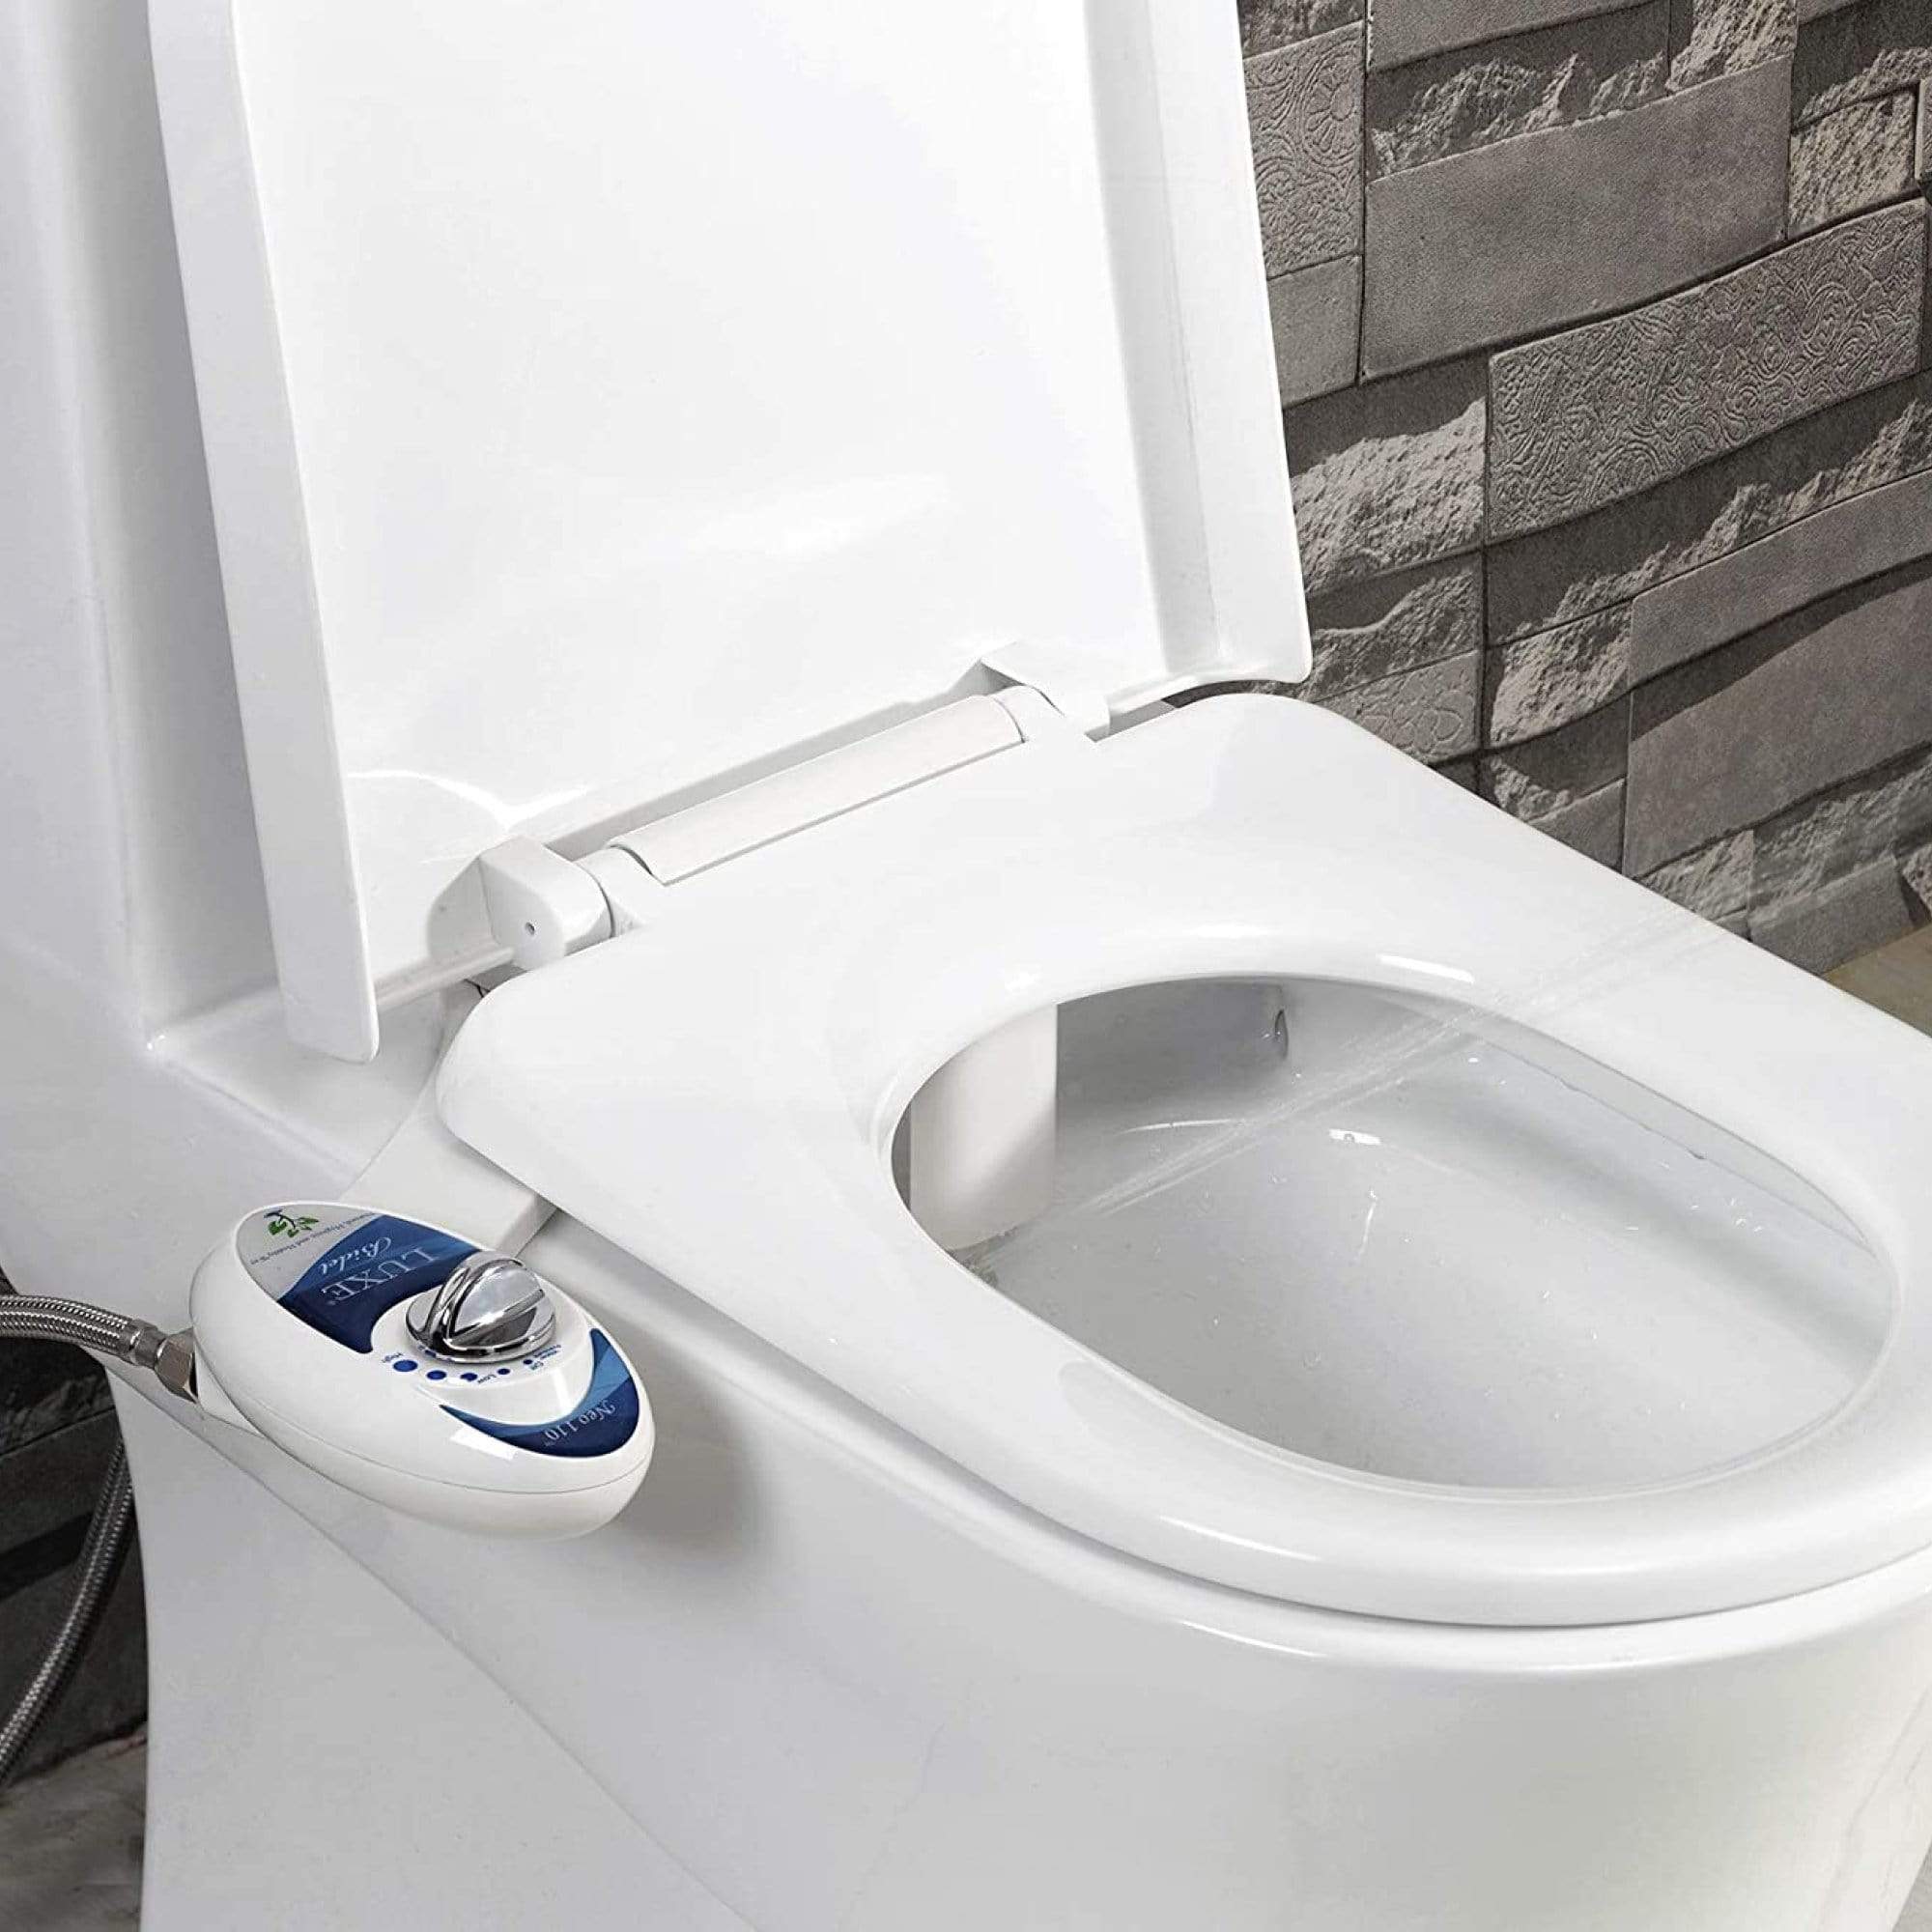 NEO 110: Imperfect Packaging - NEO 110 Blue installed on a toilet with water spraying from nozzles